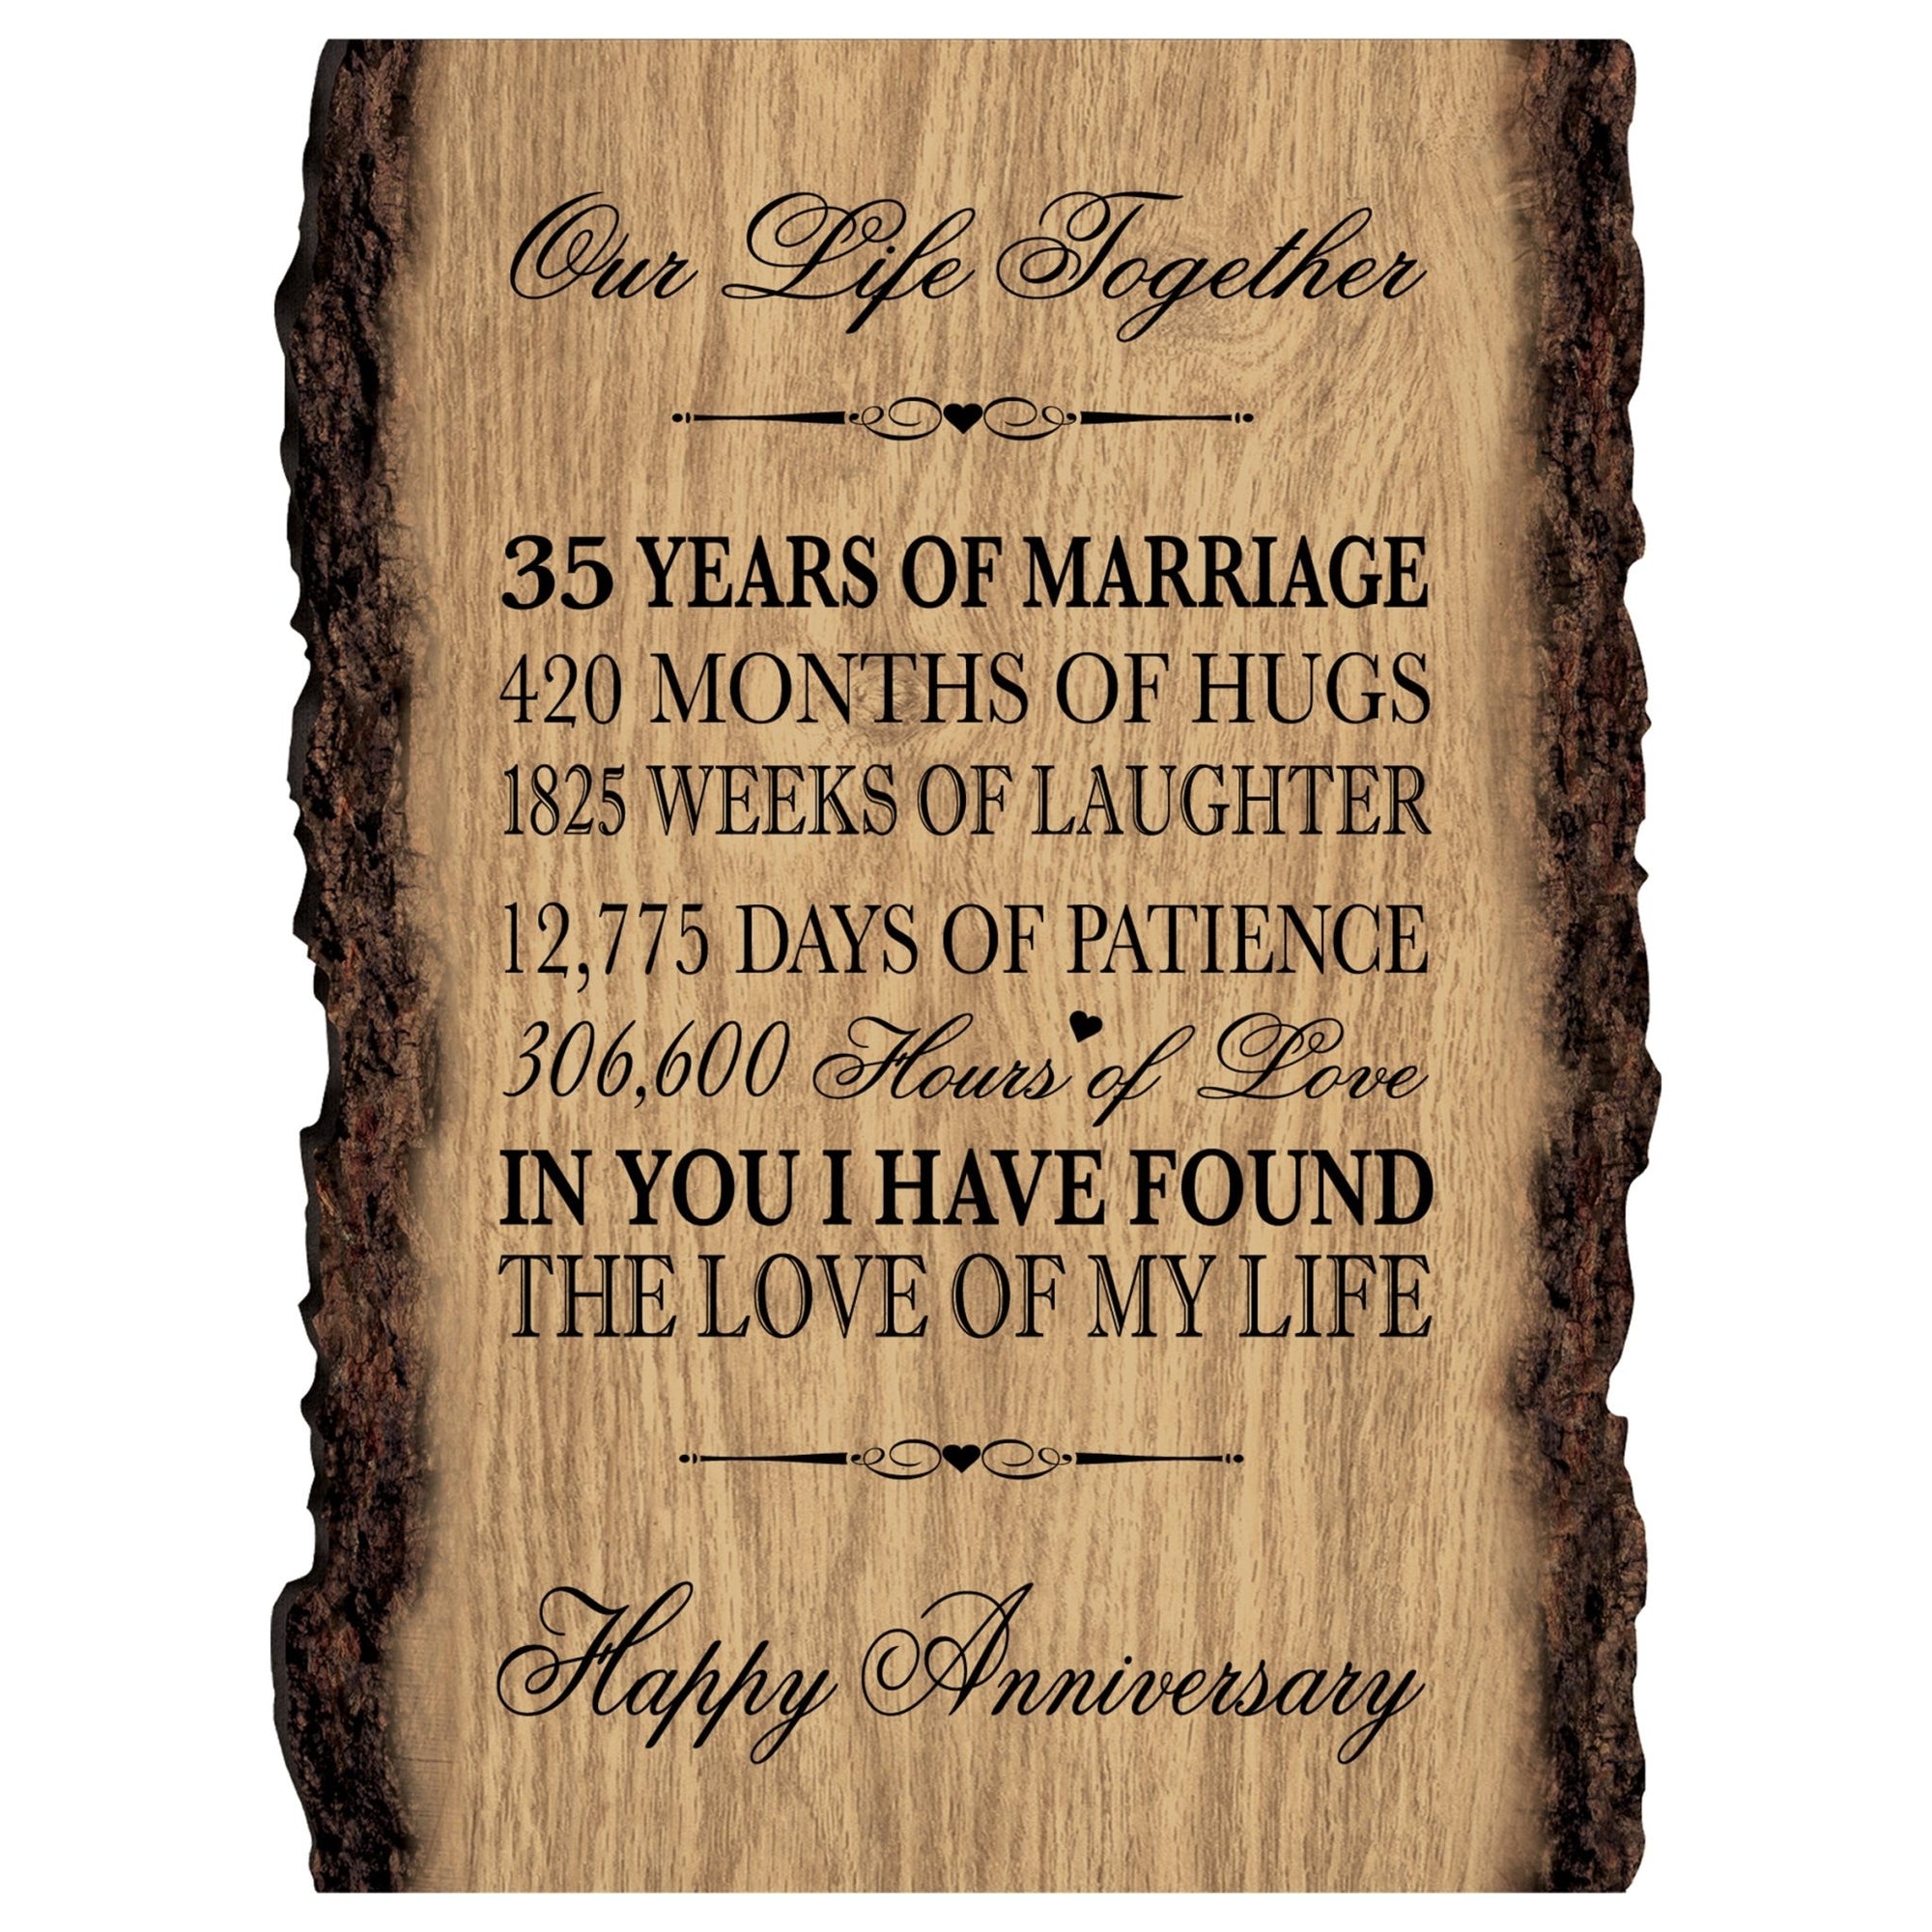 Rustic Wedding Anniversary 9x12 Barky Wall Plaque Gift For Parents, Grandparents New Couple - 35 Years Of Marriage - LifeSong Milestones